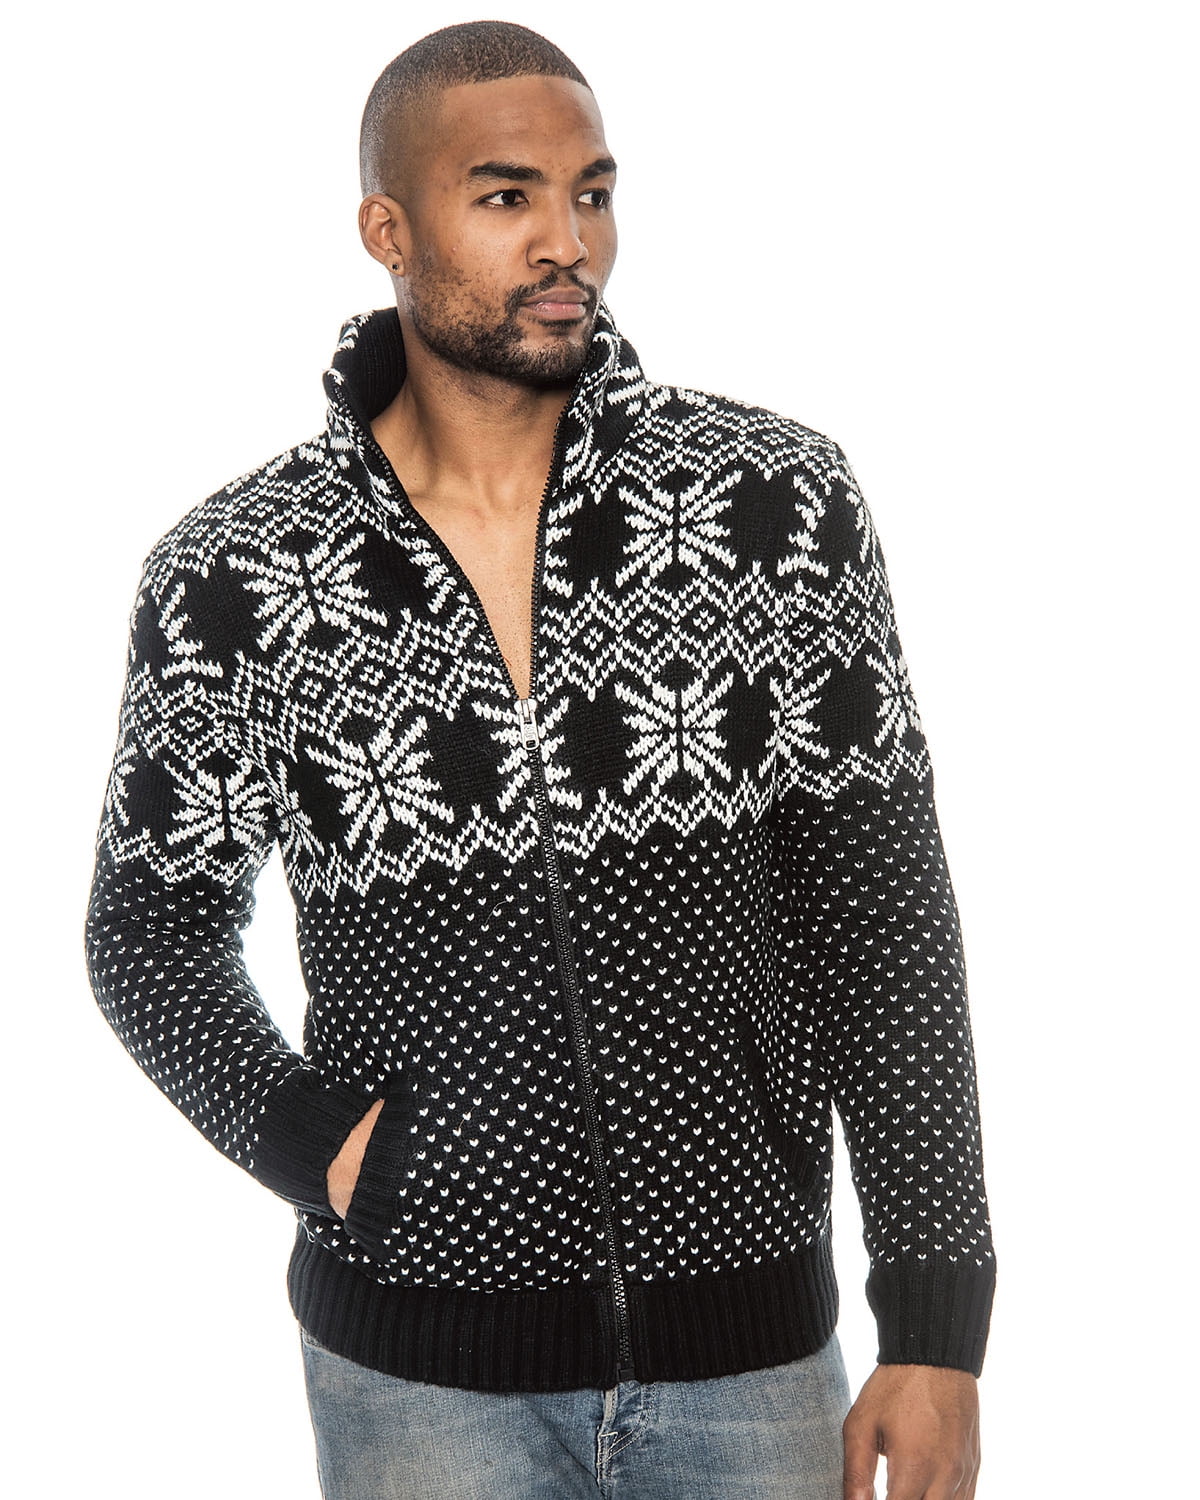 TR Men's Winter Knit Sweater with Comfort Lining by 9 Crowns Essential ...